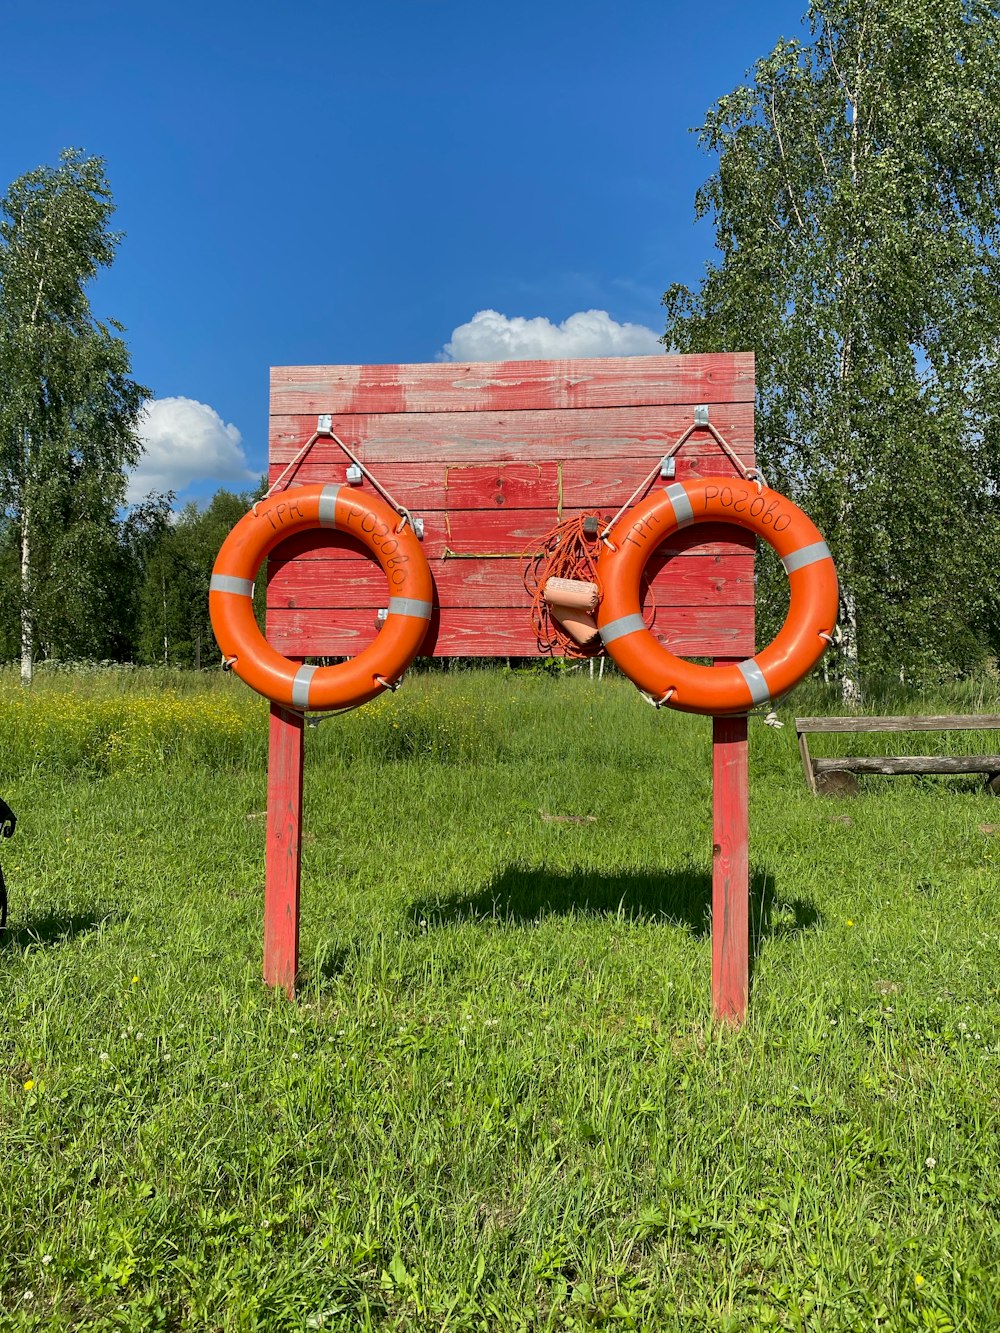 a red and orange playground toy